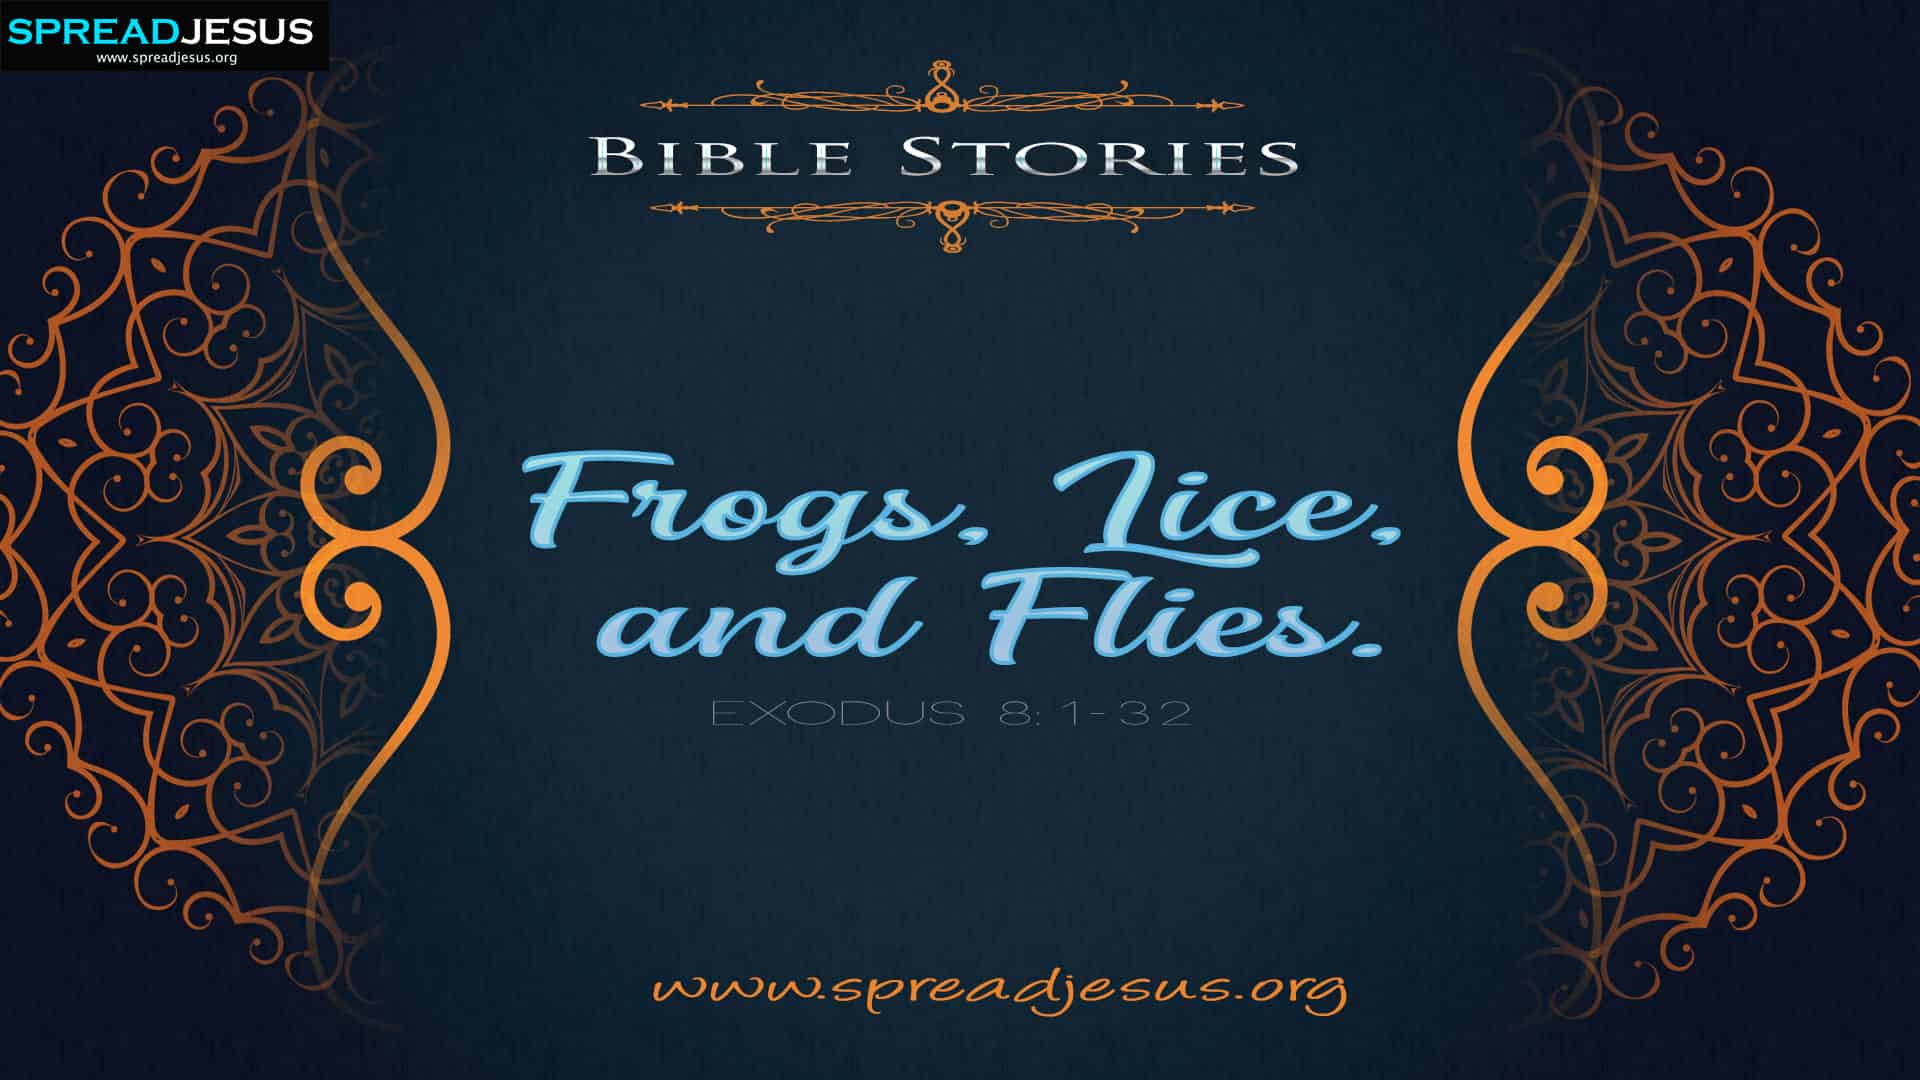 Frogs, Lice, and Flies